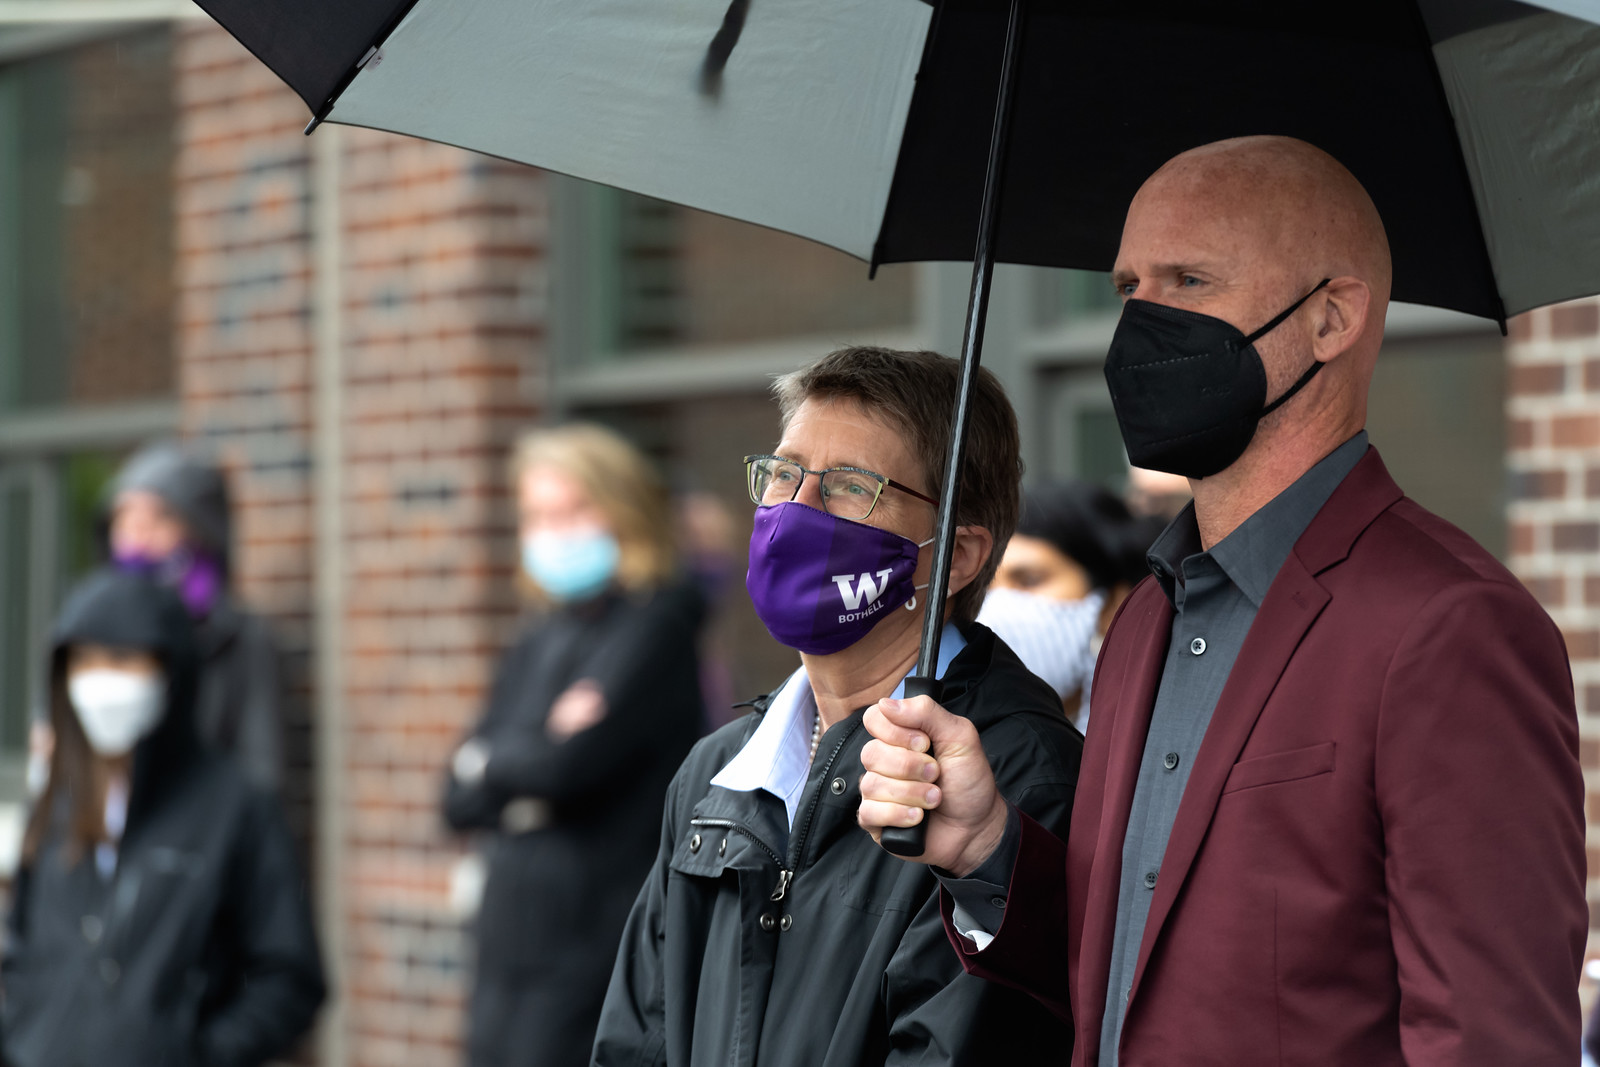 UW Bothell Chancellor Kristin Esterberg and Cascadia College President Eric Murray under an umbrella observing the event